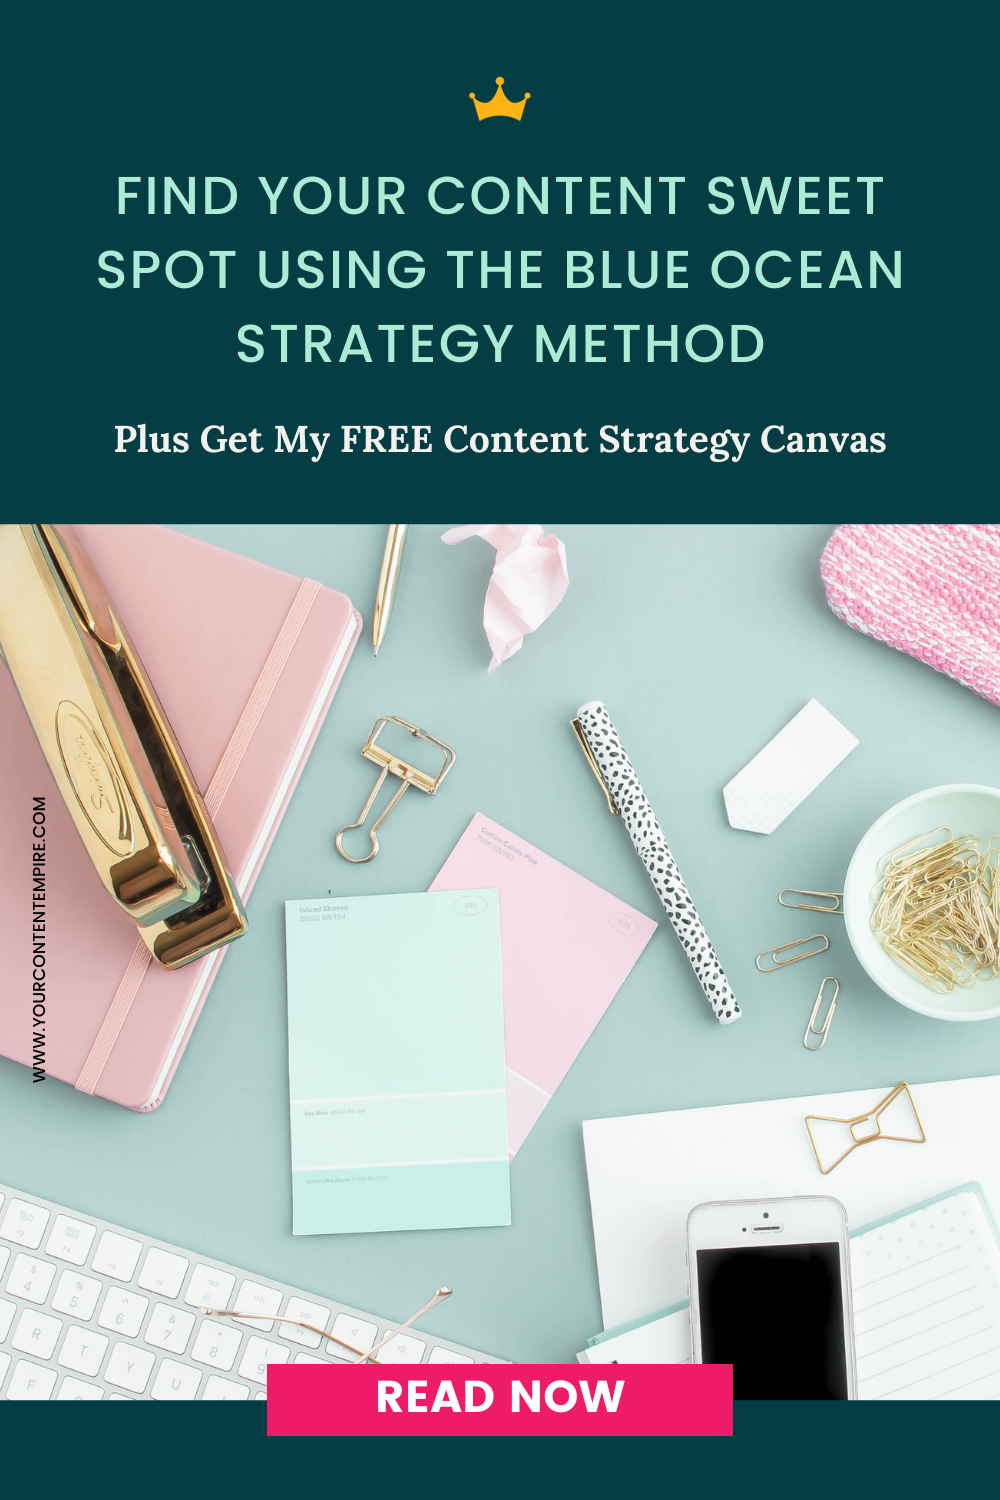 Find Your Content Sweet Spot Using the Blue Ocean Strategy Method